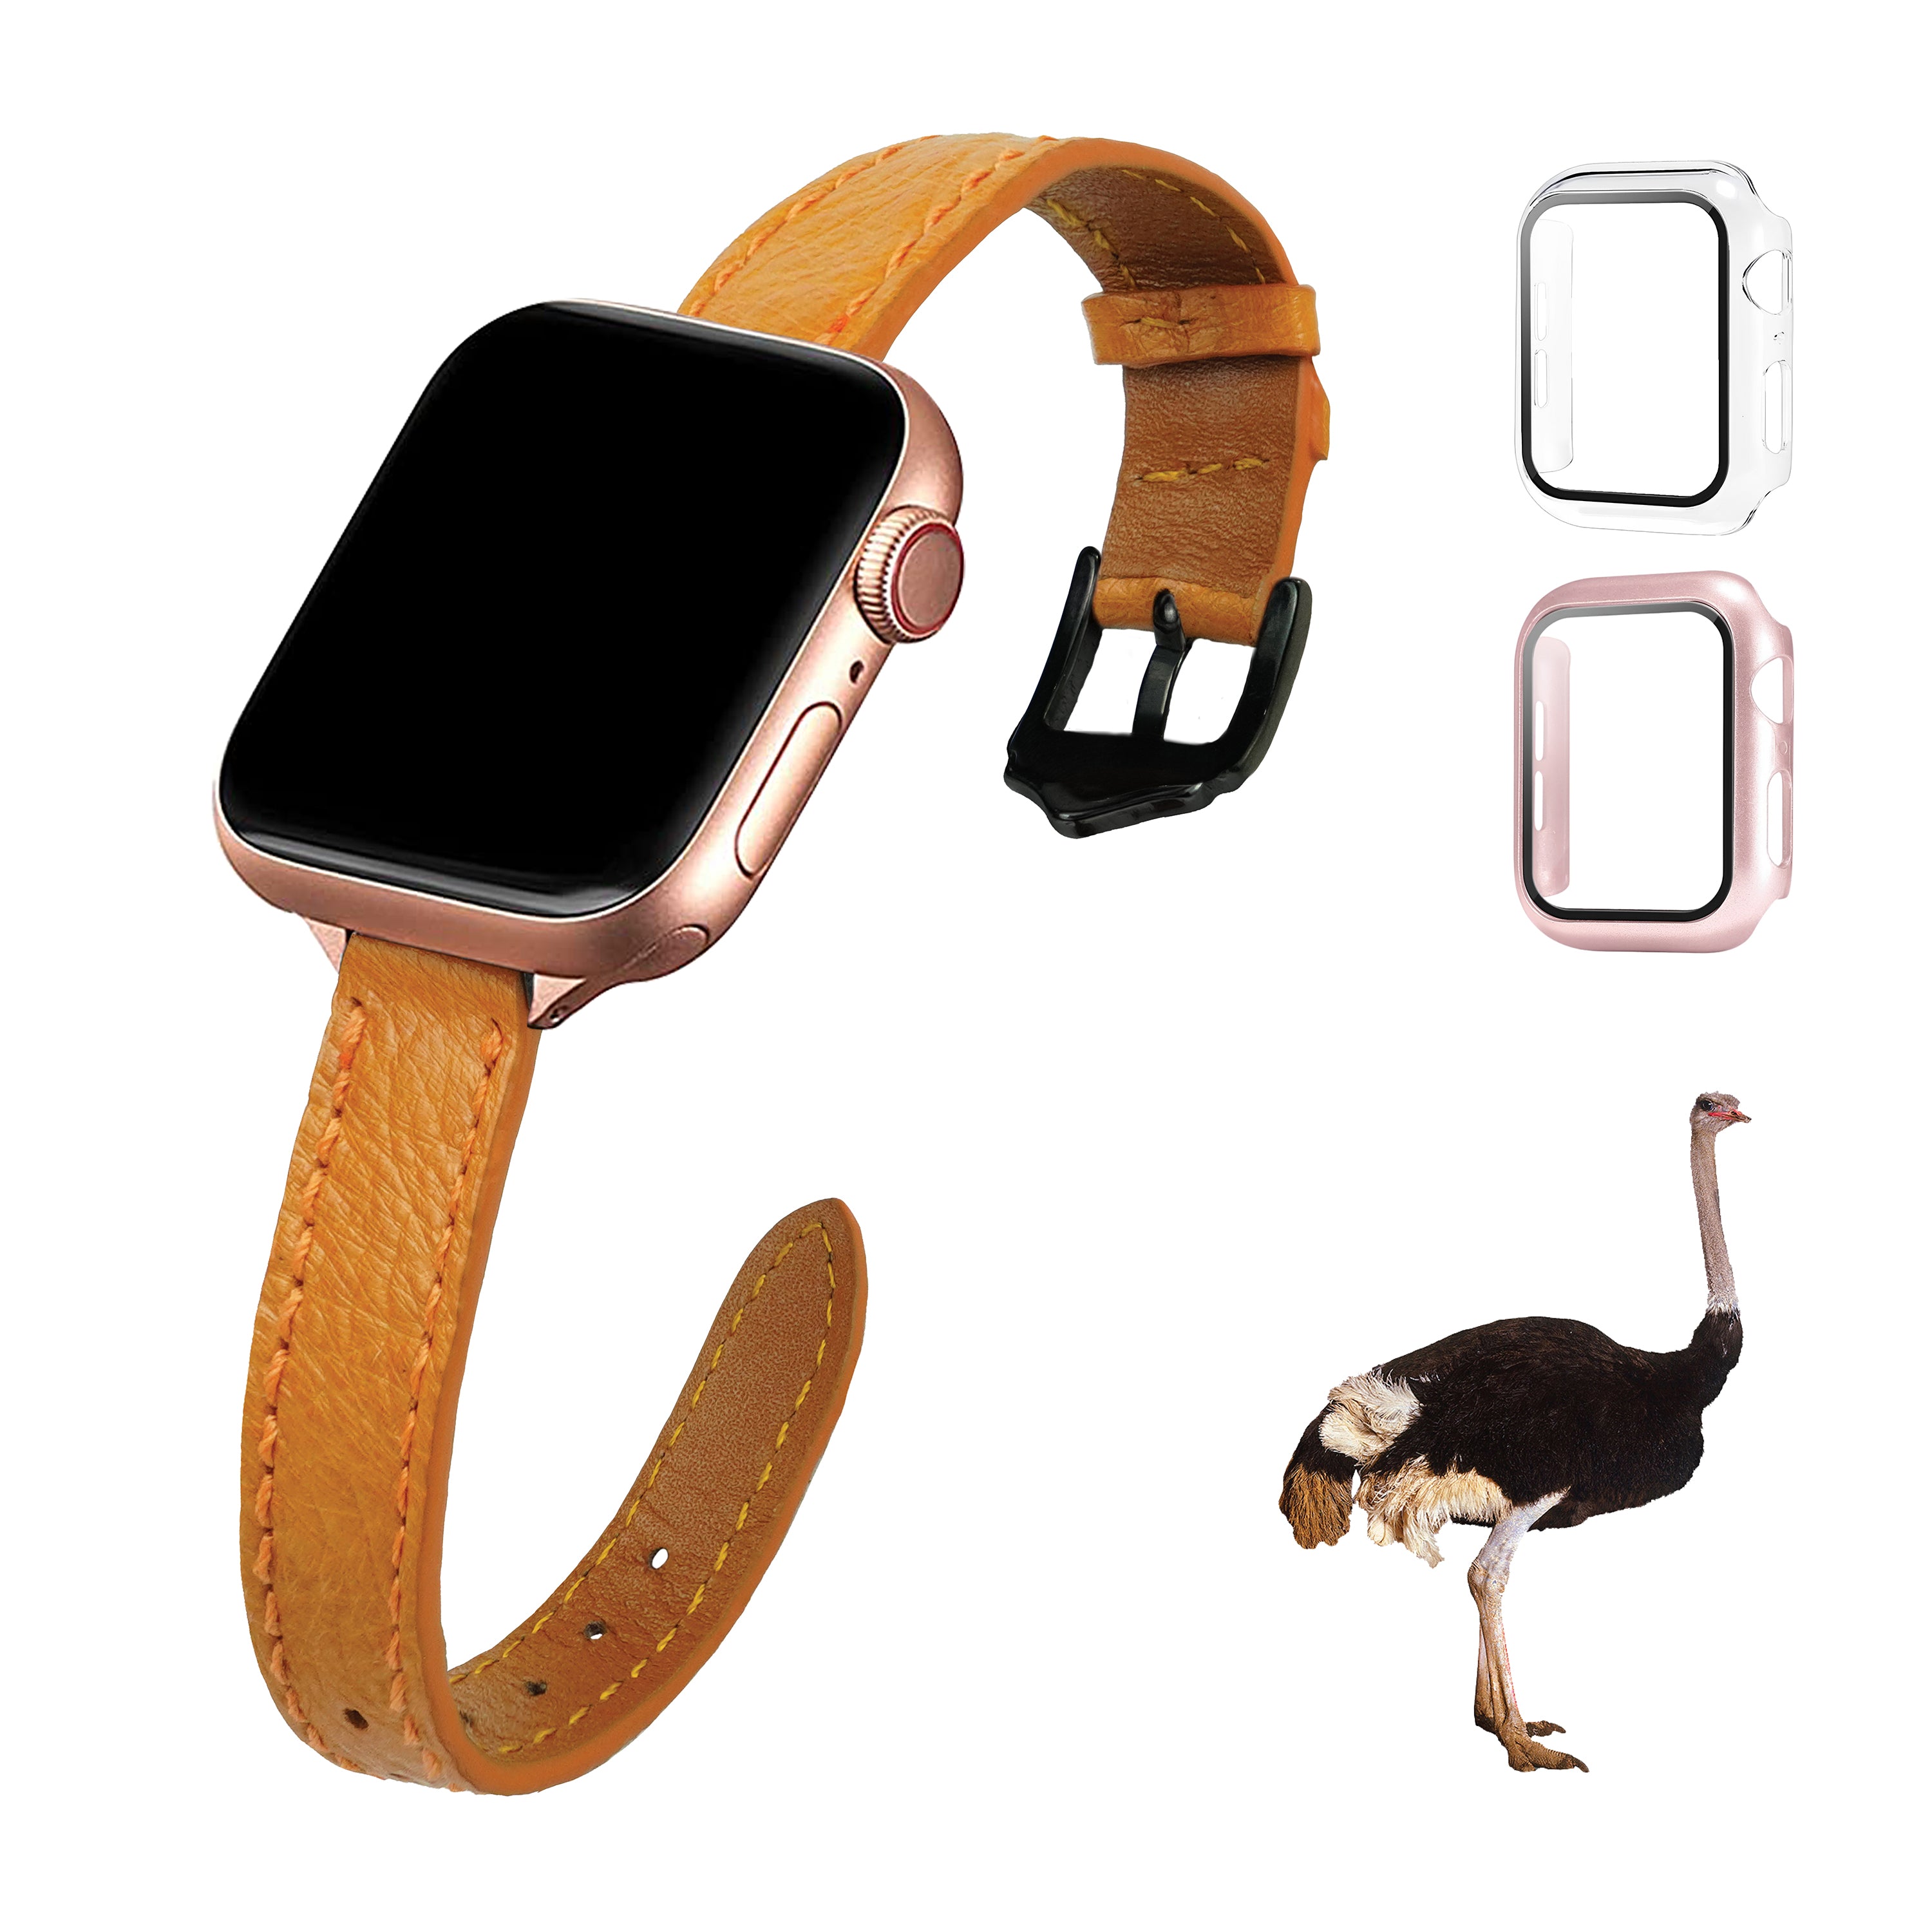 Tan Flat Ostrich Leather Band Compatible Apple Watch Iwatch 42mm Screen Protector Case Black Adapter Replacement Strap For Smartwatch Series 1 2 3 Leather Handmade AW-182B-W-42MM